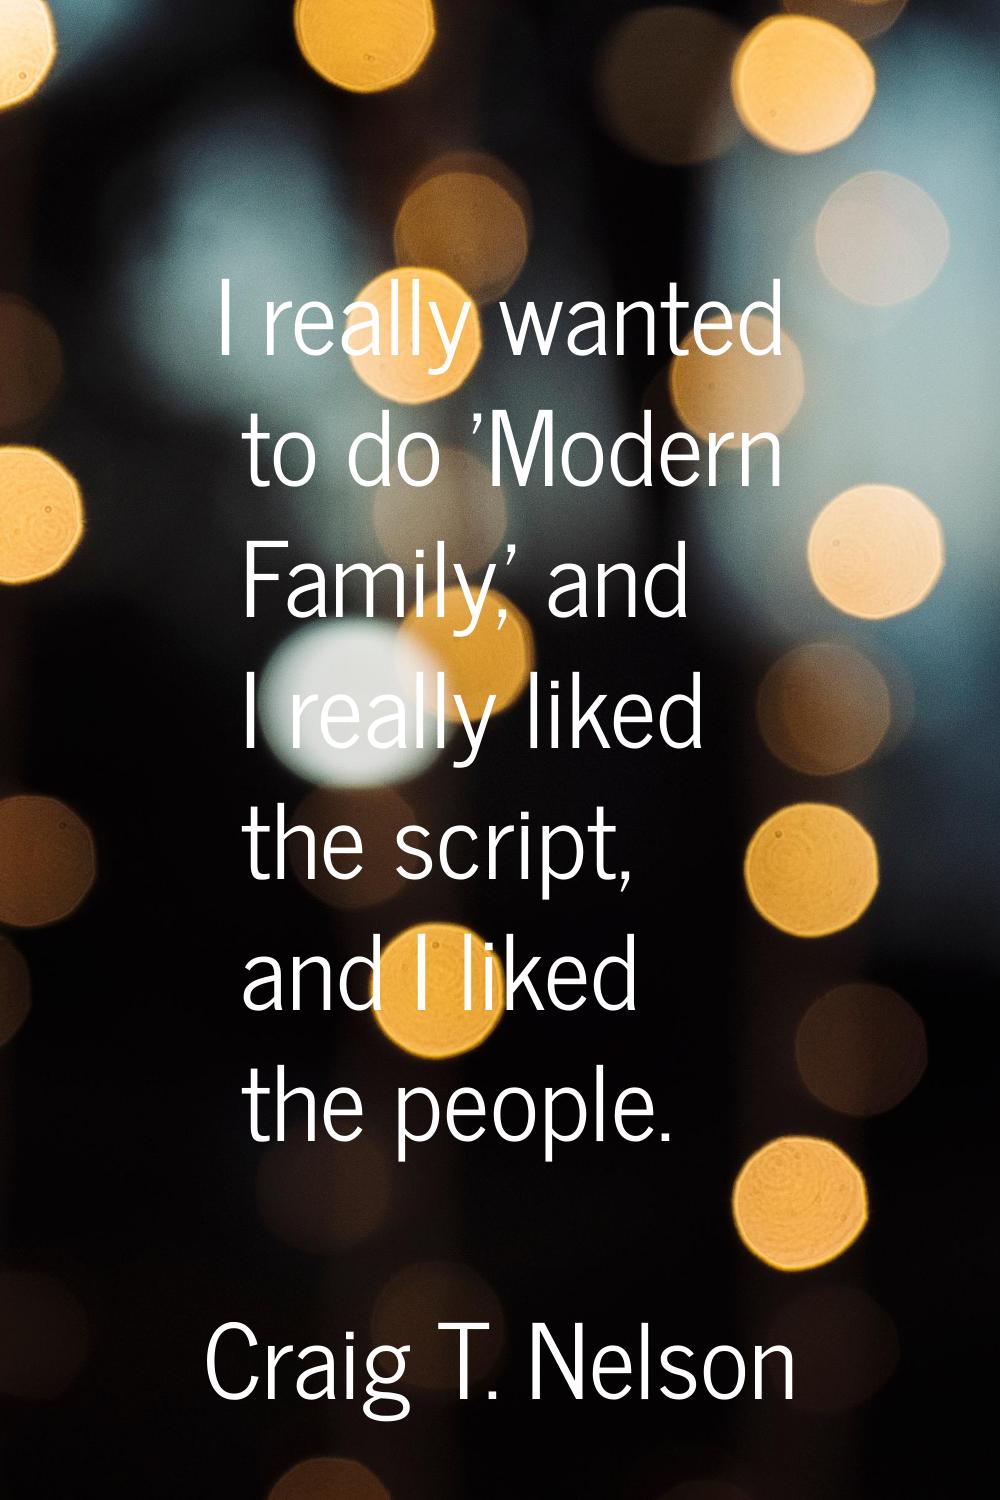 I really wanted to do 'Modern Family,' and I really liked the script, and I liked the people.